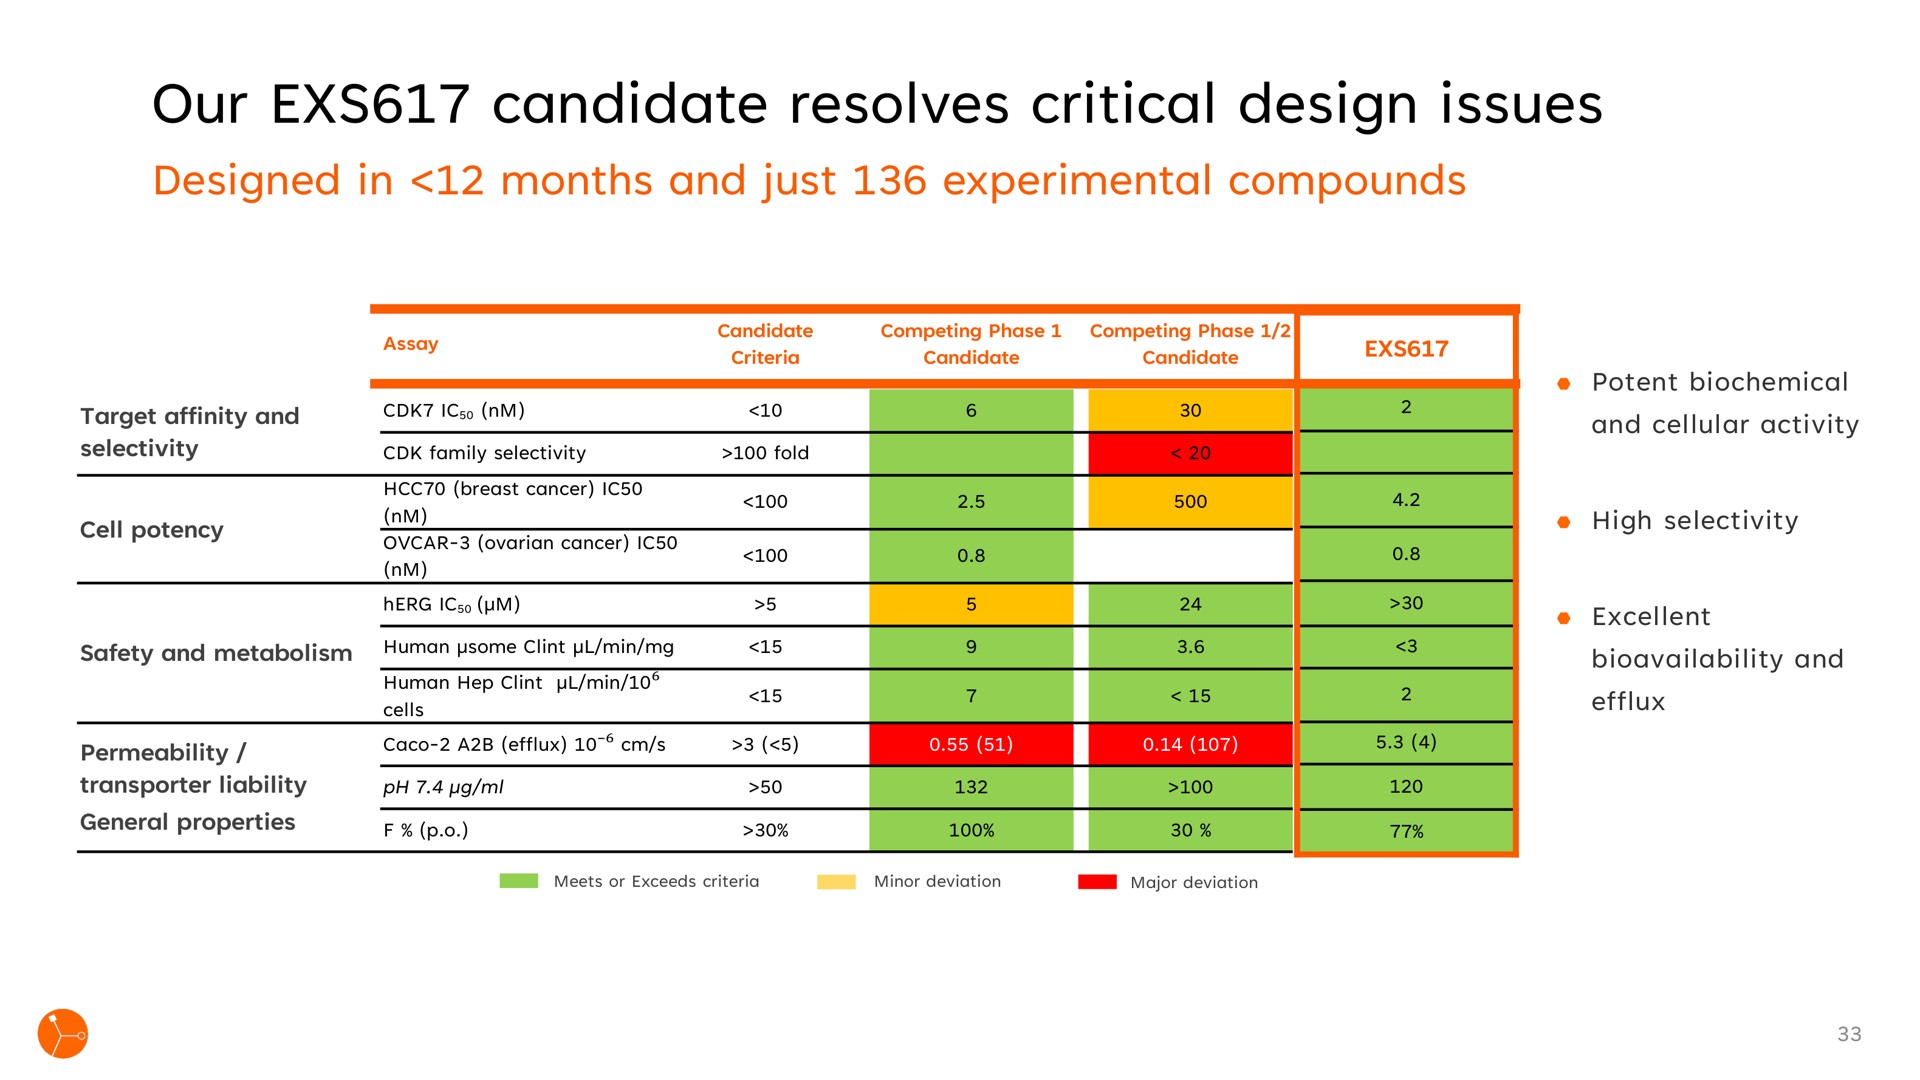 our exs candidate resolves critical design issues | Exscientia